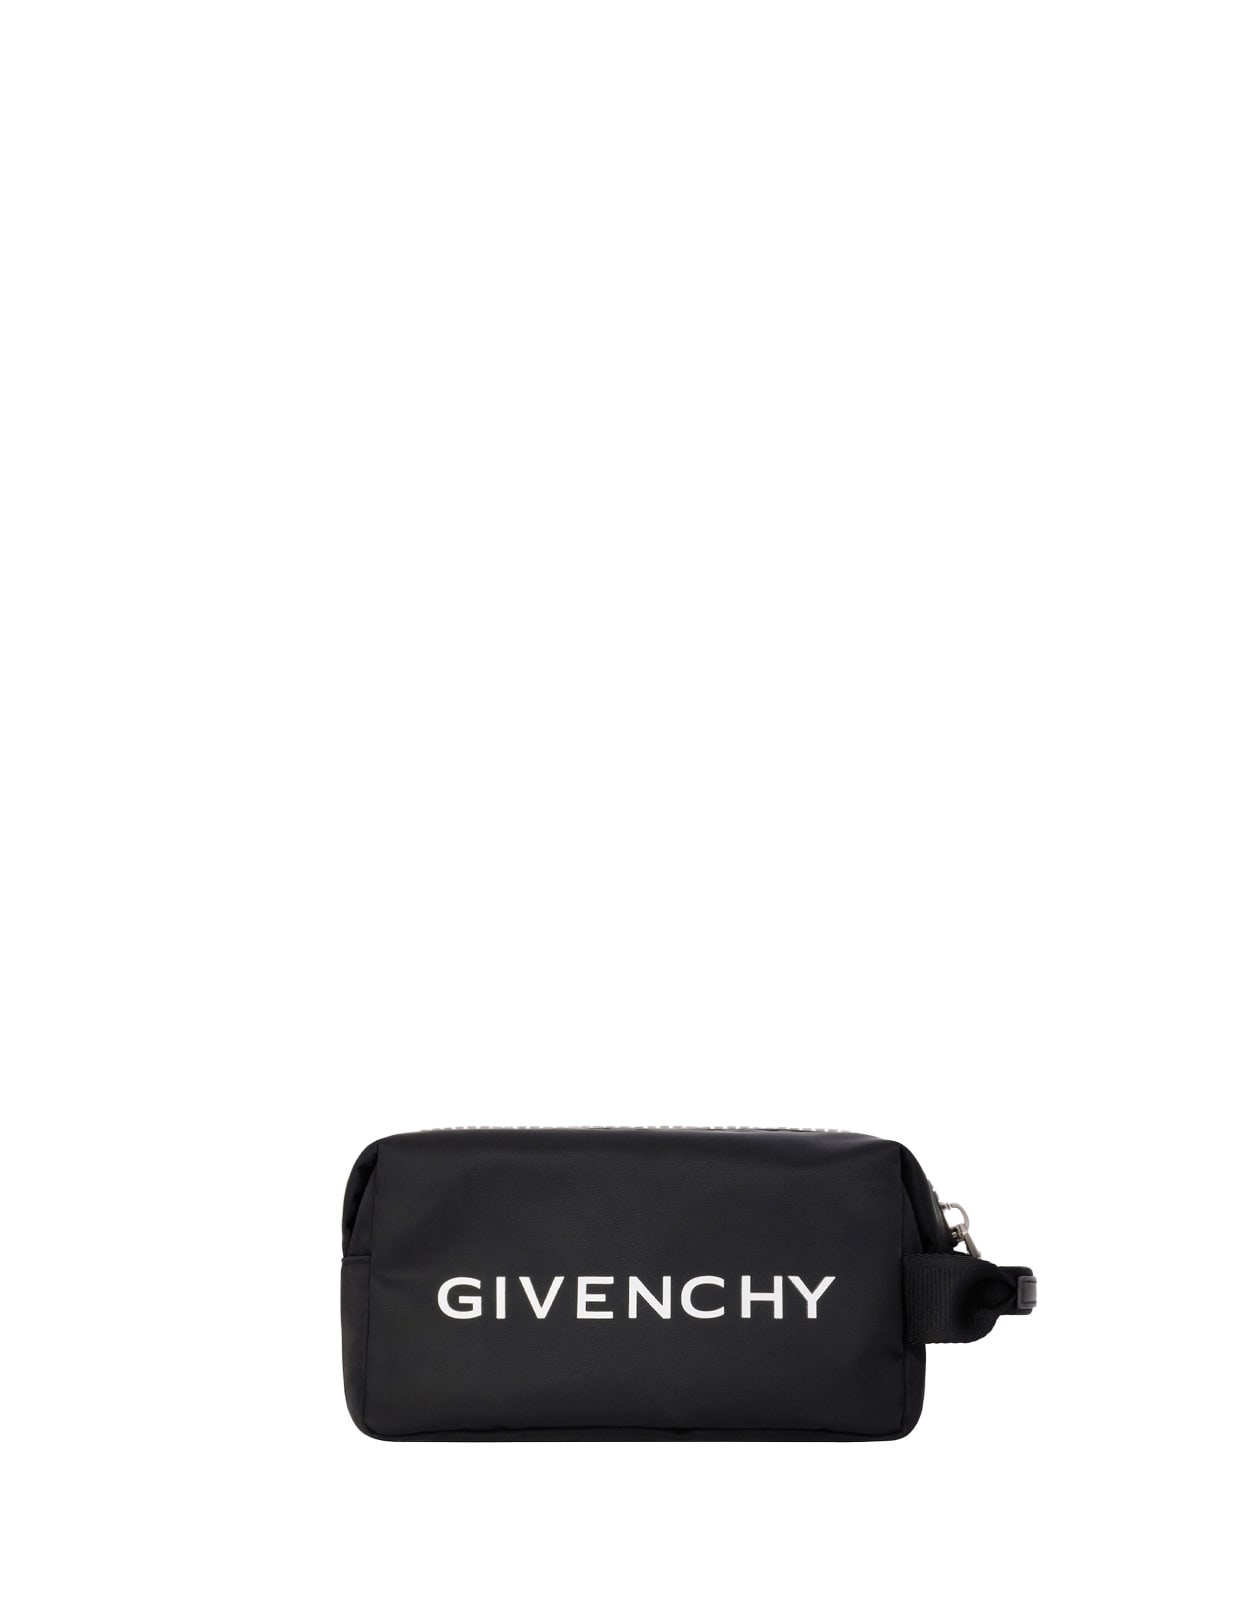 Givenchy G-zip Toilet Pouch In Black Nylon